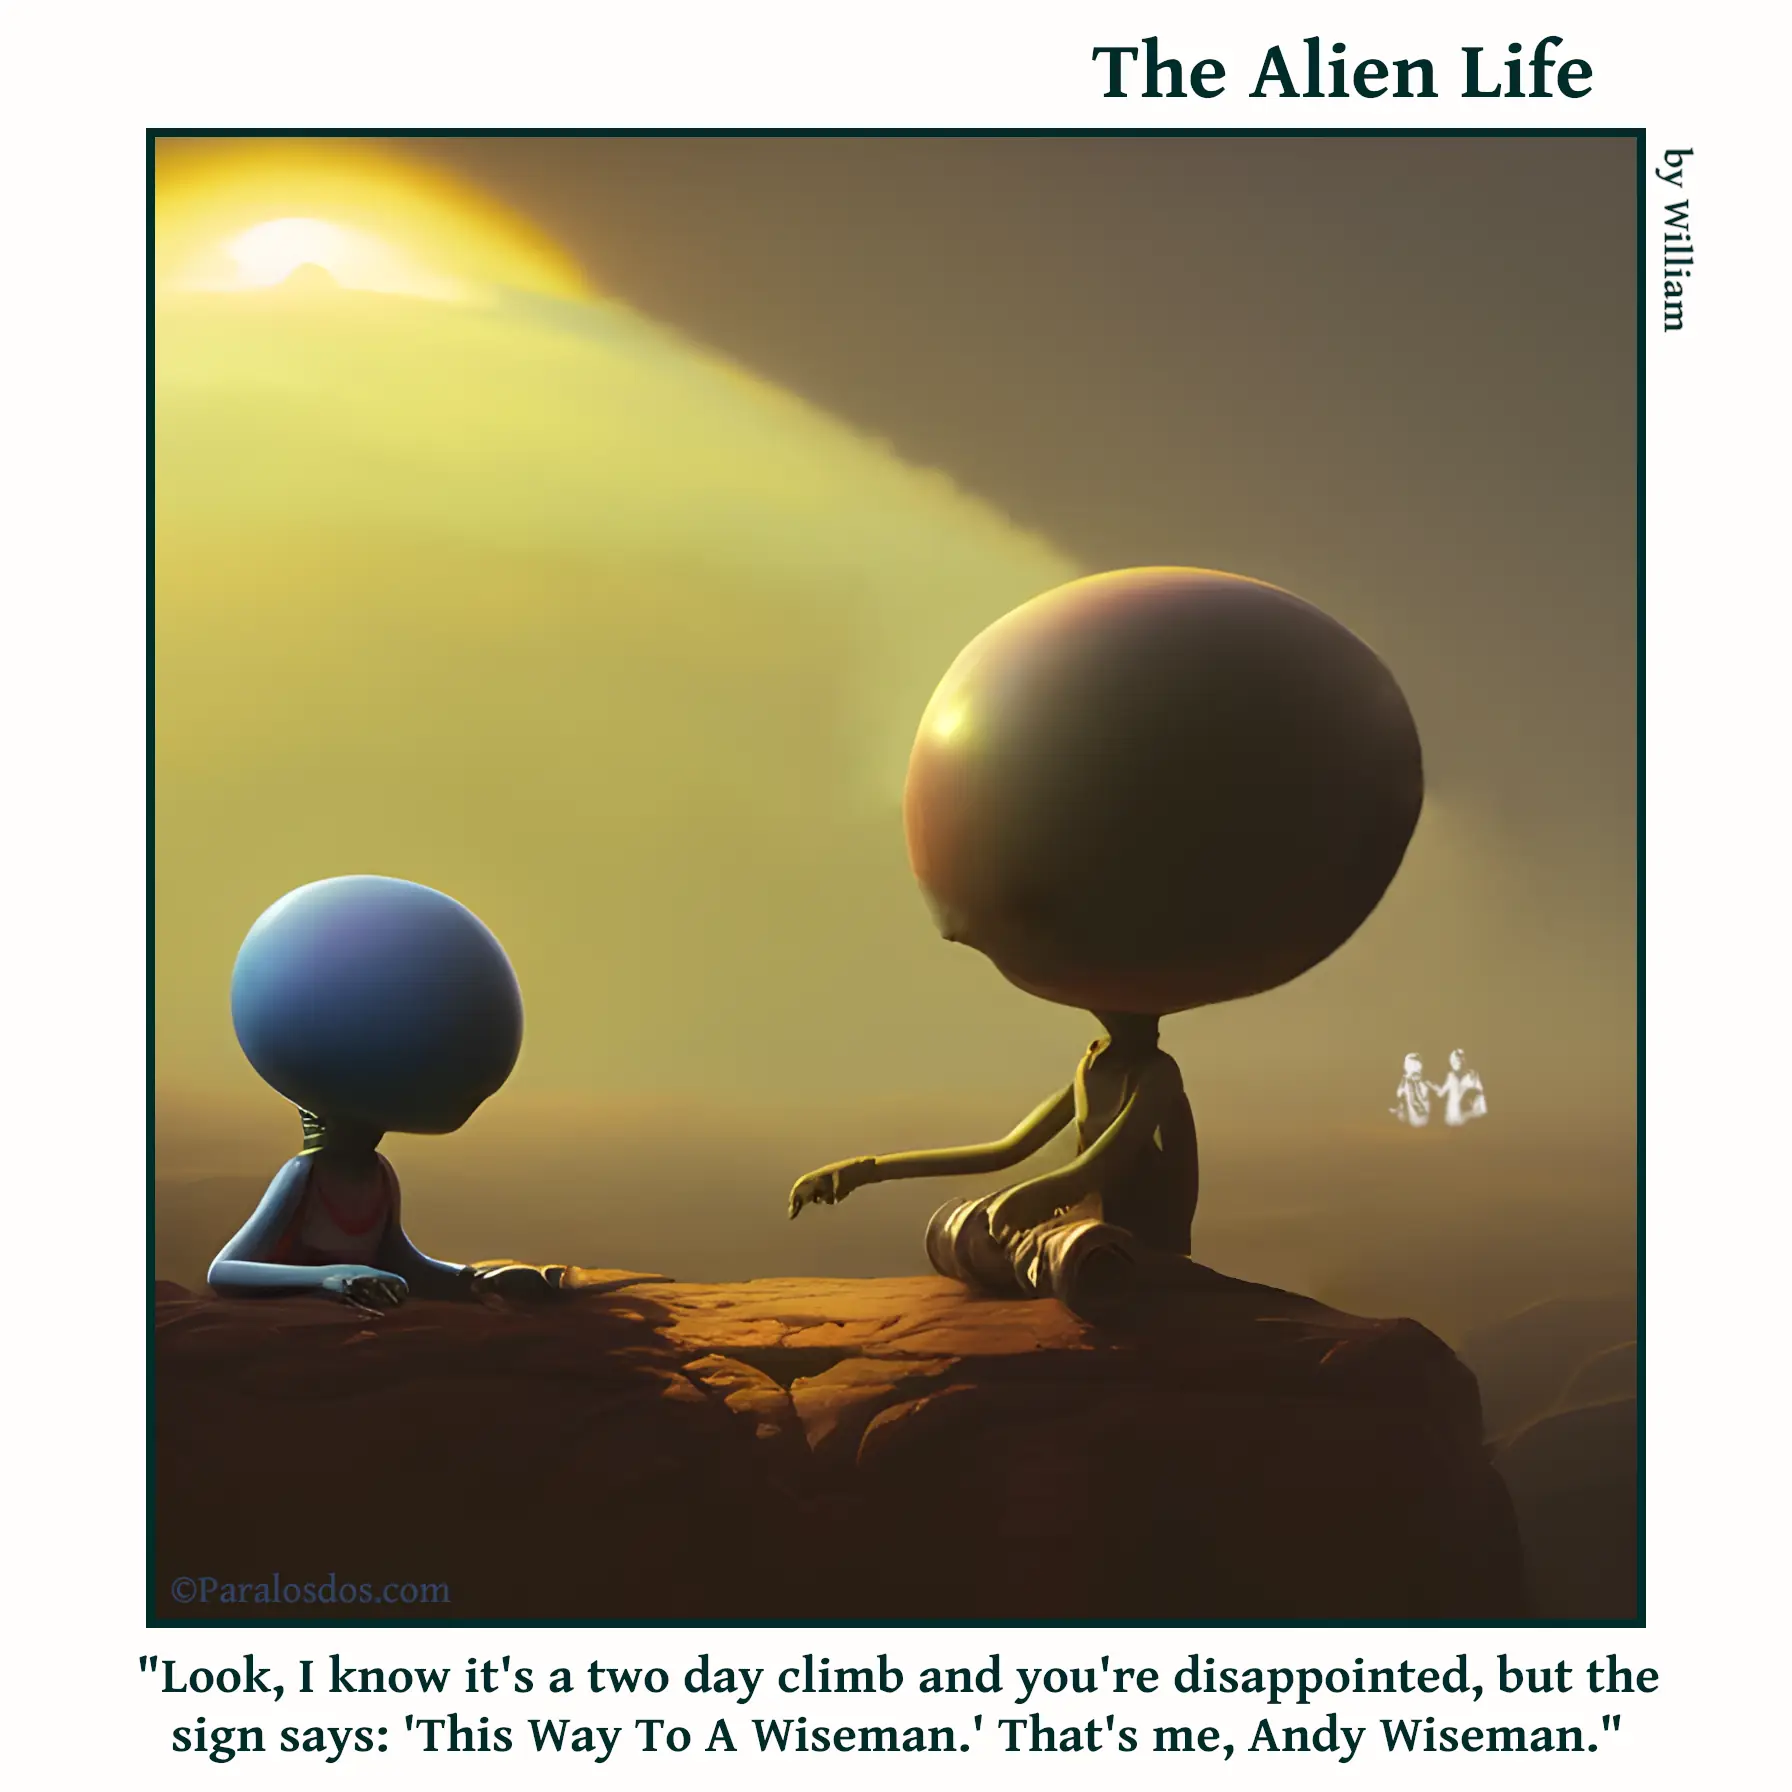 The Alien Life, one panel Comic. An alien has just reached the top of a mountain. He is looking at another alien seated at the top The caption reads: "Look, I know it's a two day climb and you're disappointed, but the sign says: 'This Way To A Wiseman.' That's me, Andy Wiseman."